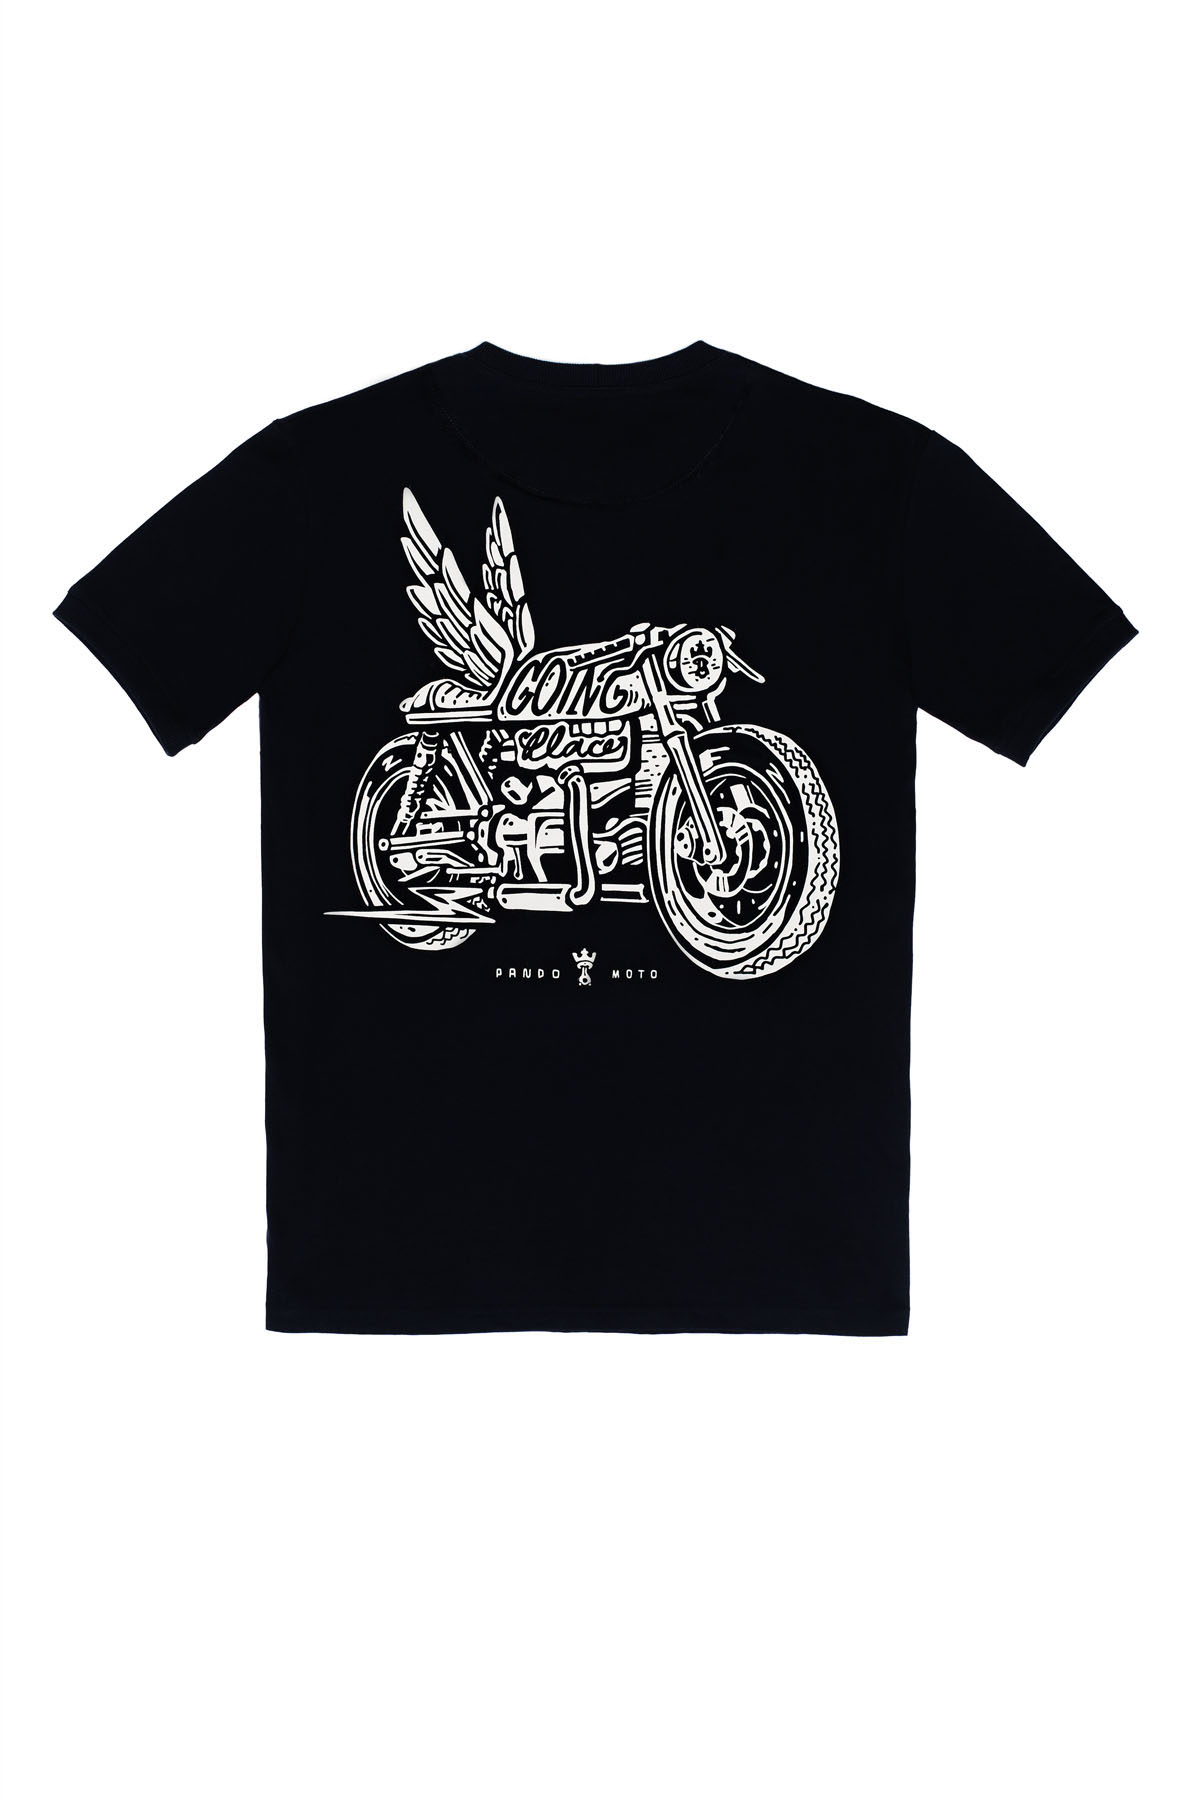 Motorcycle Graphic Tee Shirt - MIKE MOTO WING 1